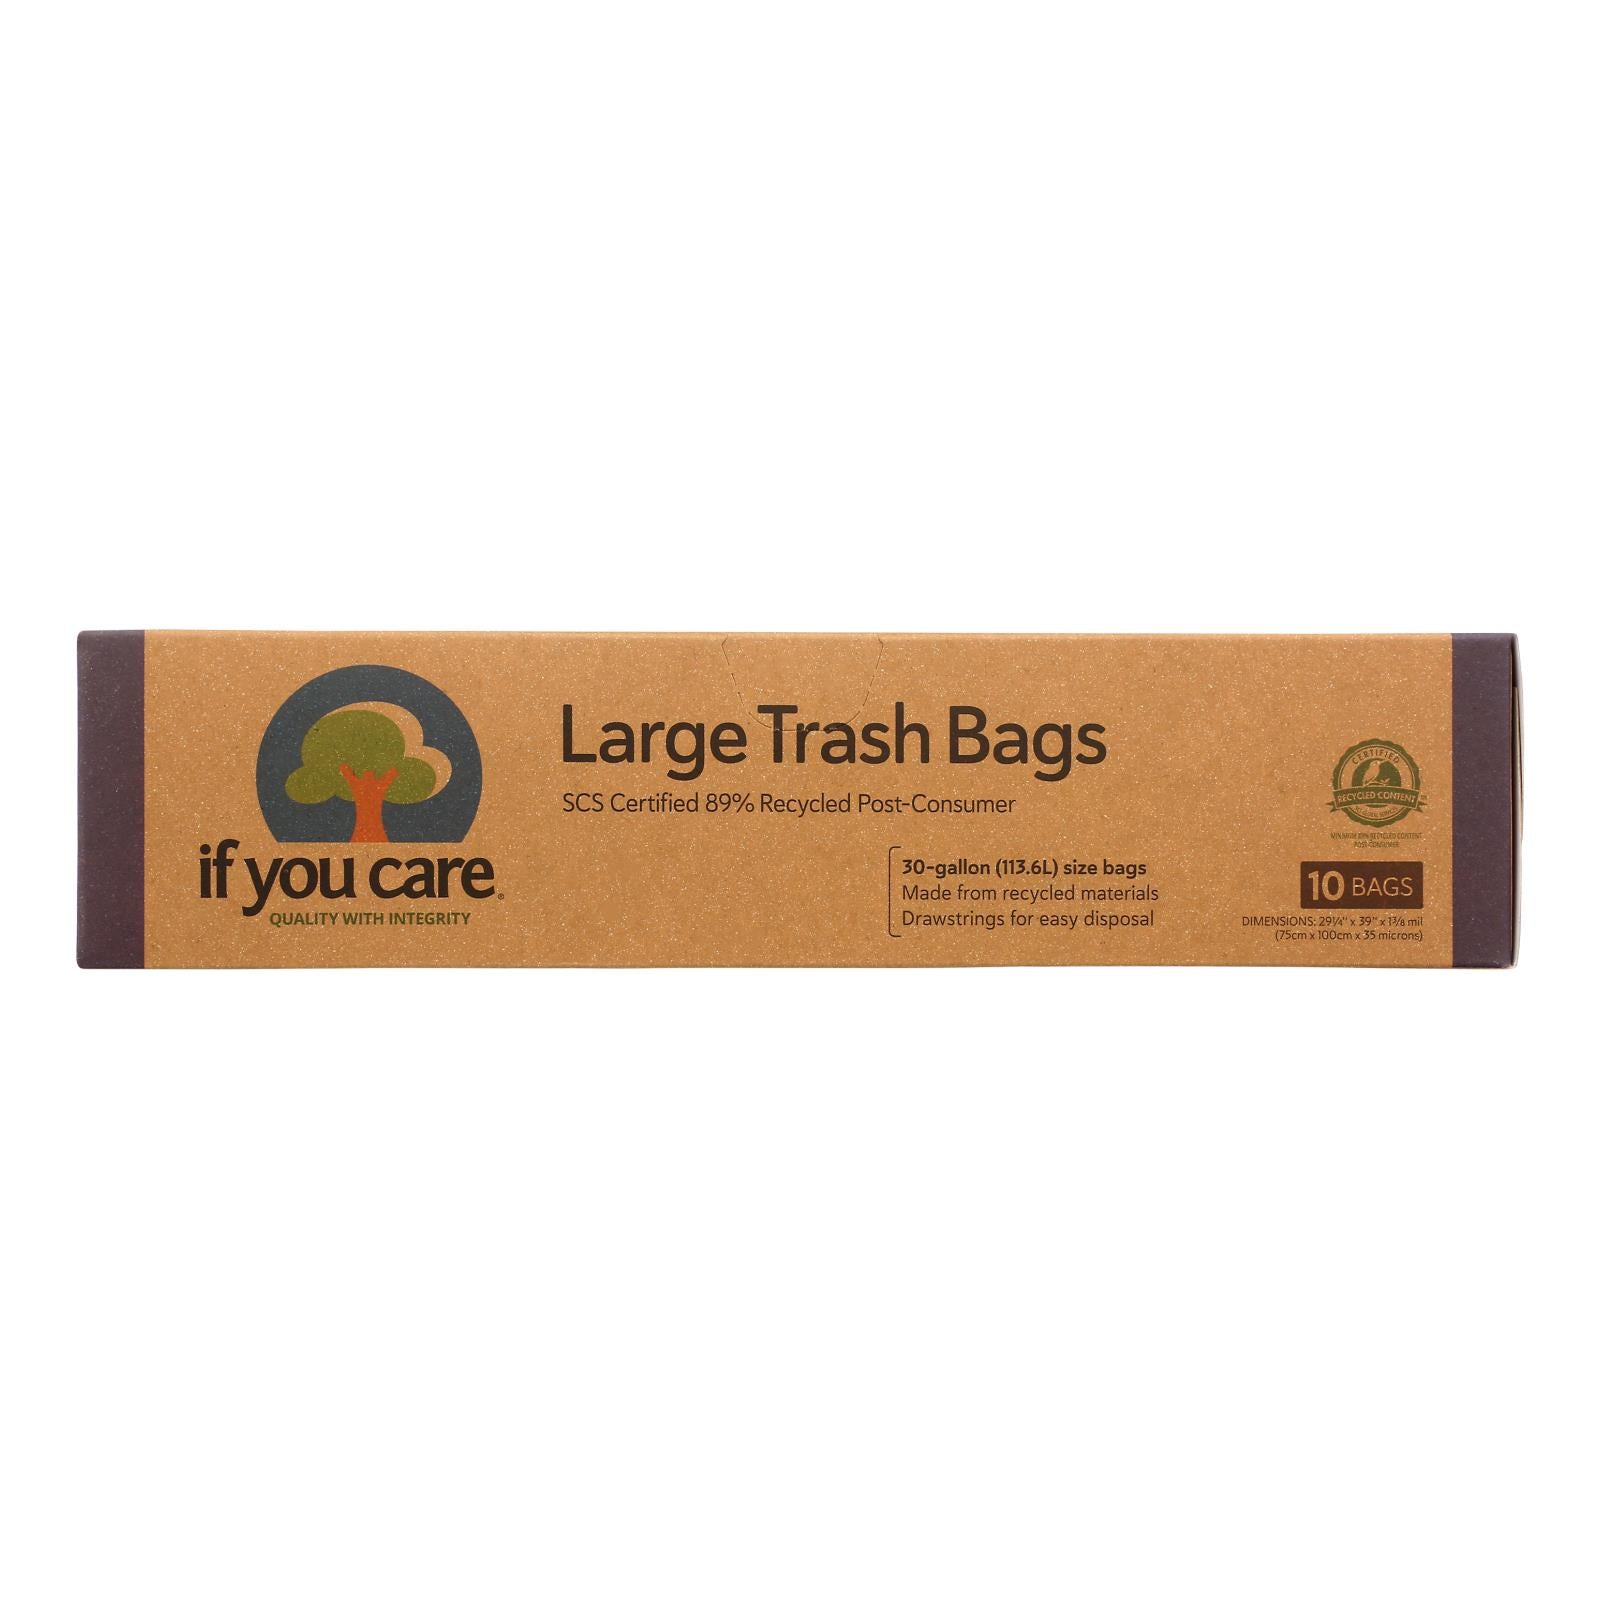 If You Care Trash Bags - Recycled - Case Of 12 - 10 Count